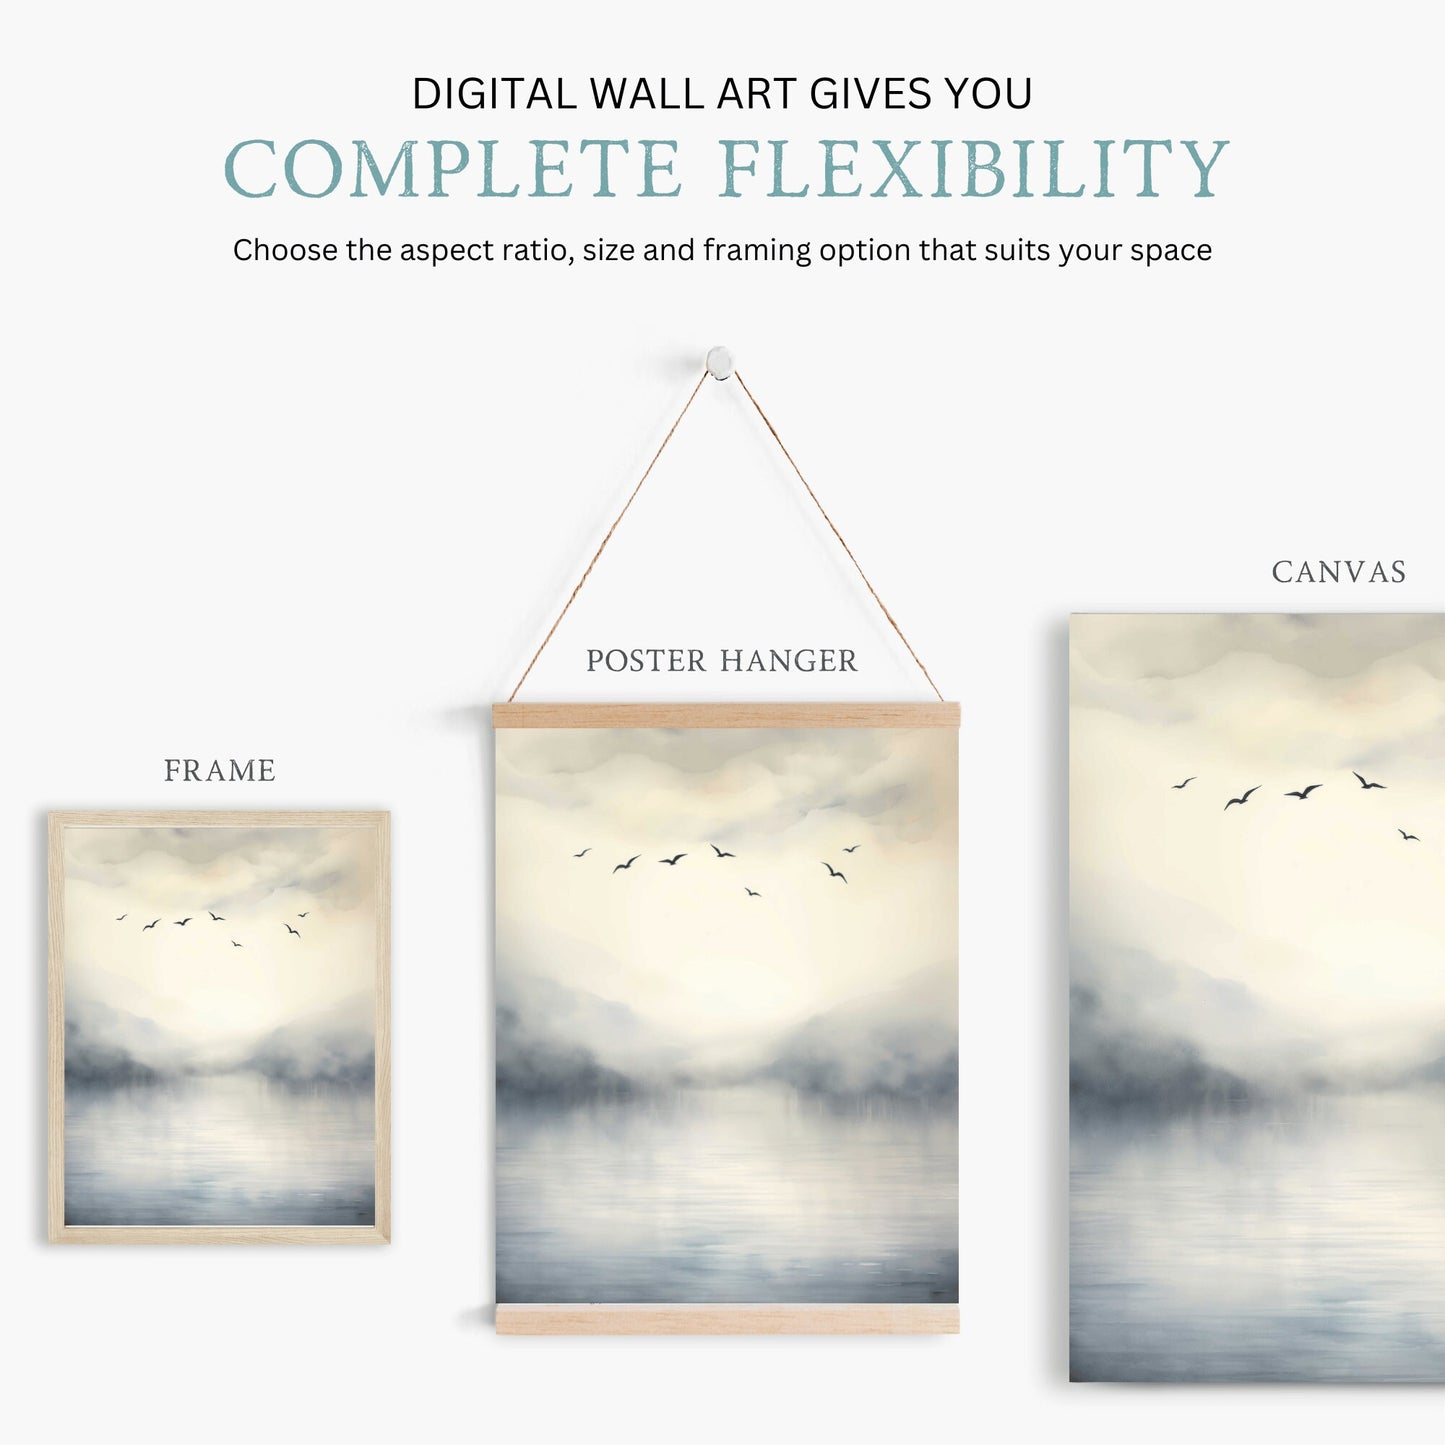 Abstract Lake & Birds Wall Art, Abstract Nature Print, Watercolor Landscape Painting, Tranquil Home Decor, Digital Printable Living Room Art